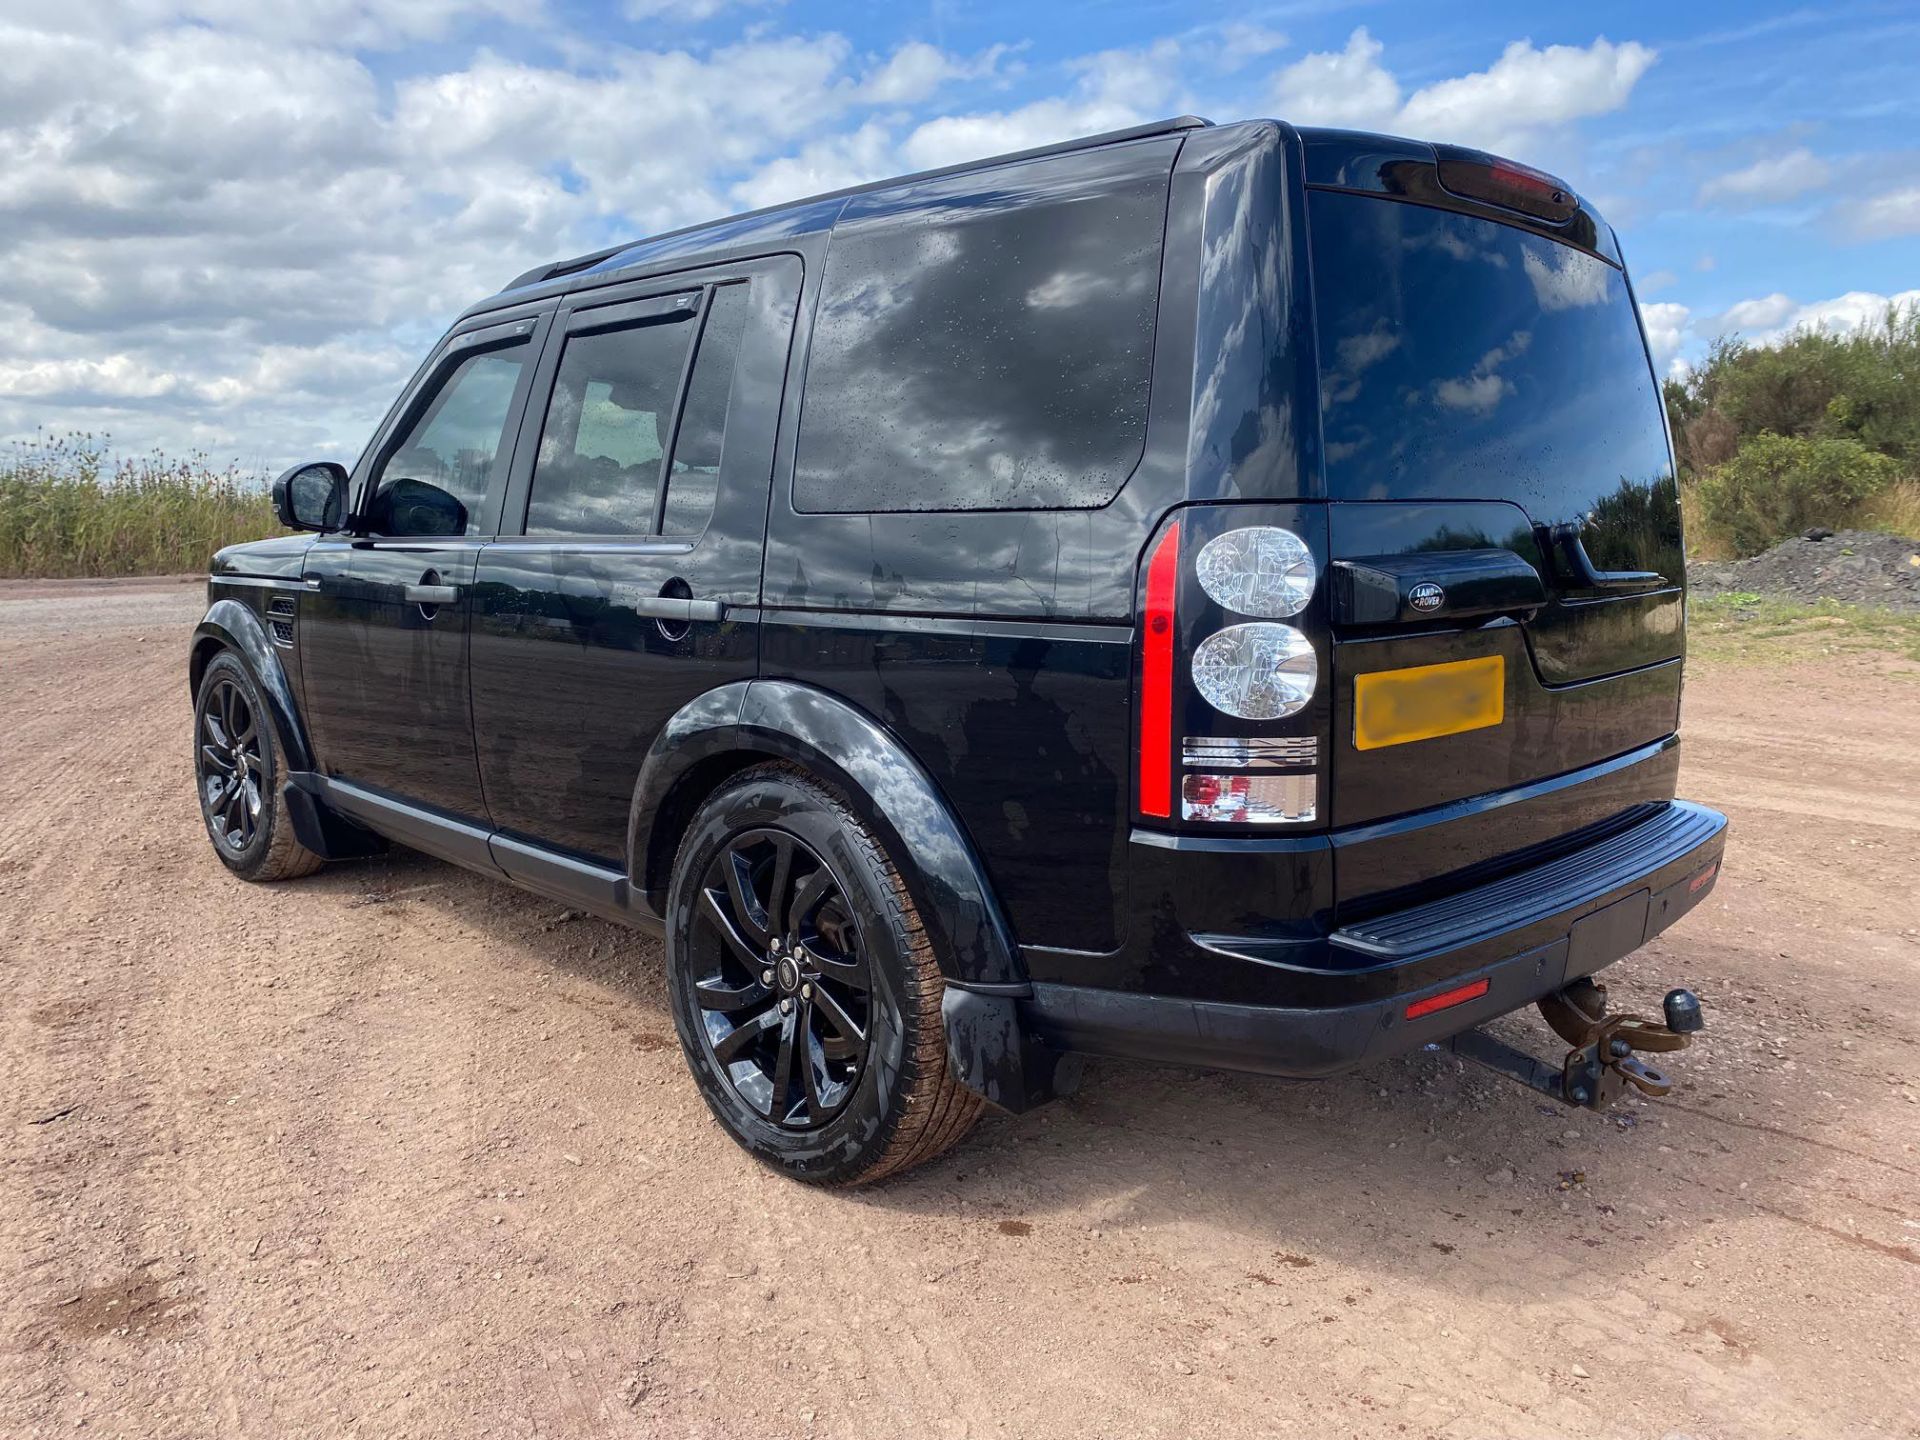 2015 LAND ROVER DISCOVERY XS SDV6 AUTO BLACK CONVERTED COMMERCIAL – WITH REAR SEAT CONVERSION - Image 5 of 13